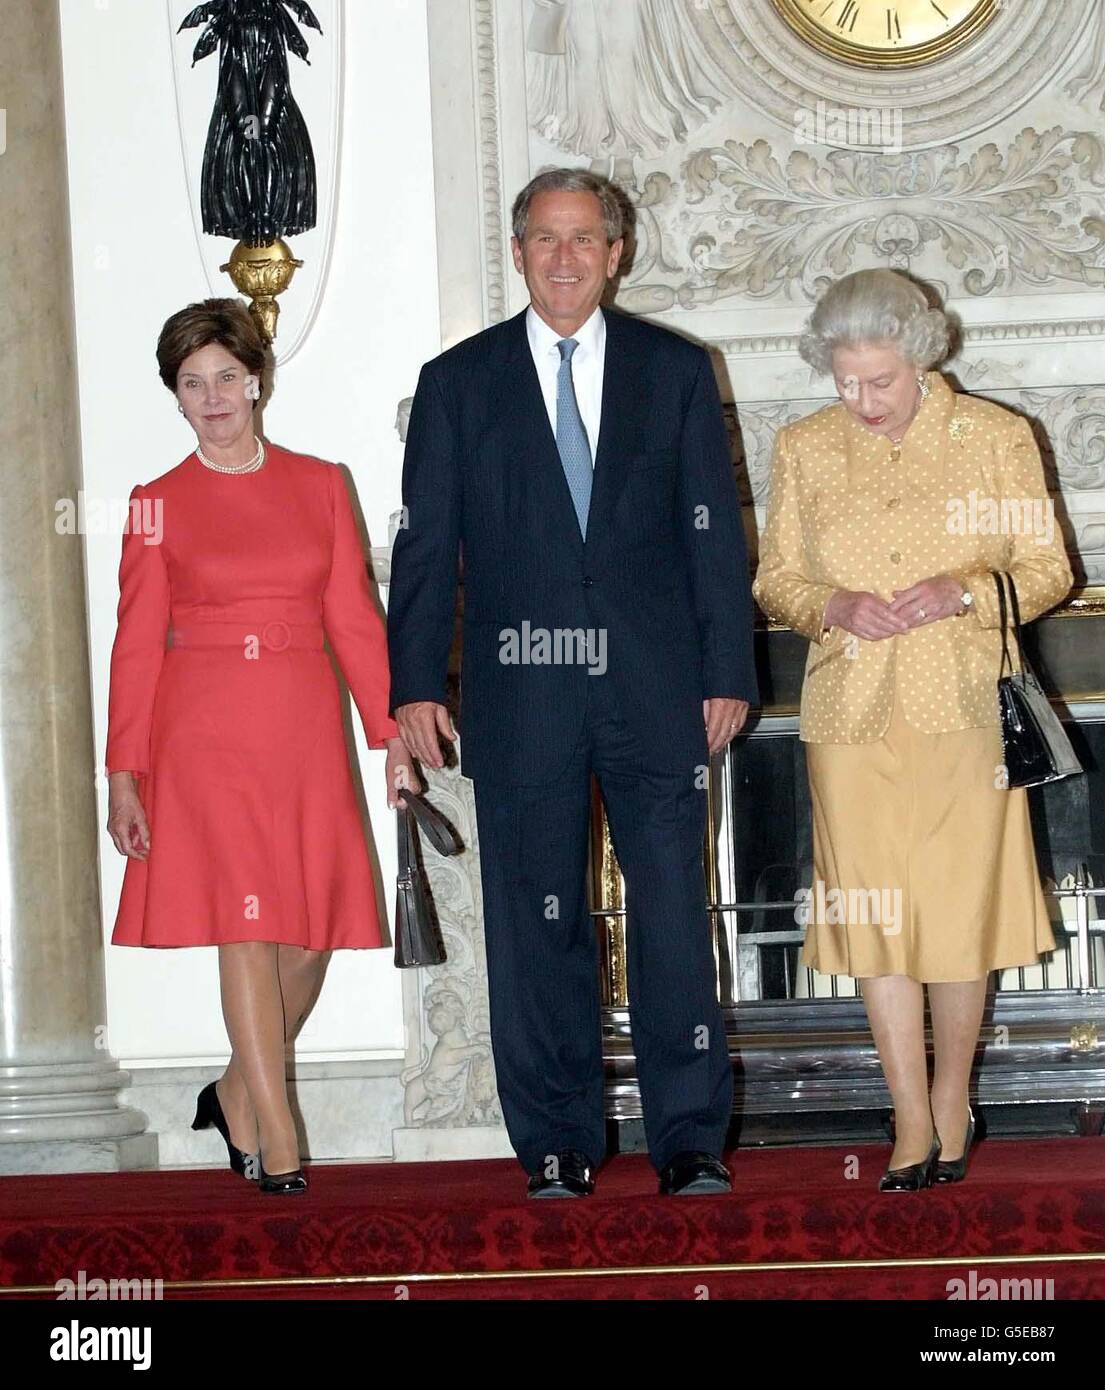 America's President Bush (C) with Britain's Queen Elizabeth II (R) and his wife, Laura (L), at Buckingham Palace, for lunch. The US president is on his first visit to the United Kingdom, before travelling on to the G8 summit in Genoa. Stock Photo